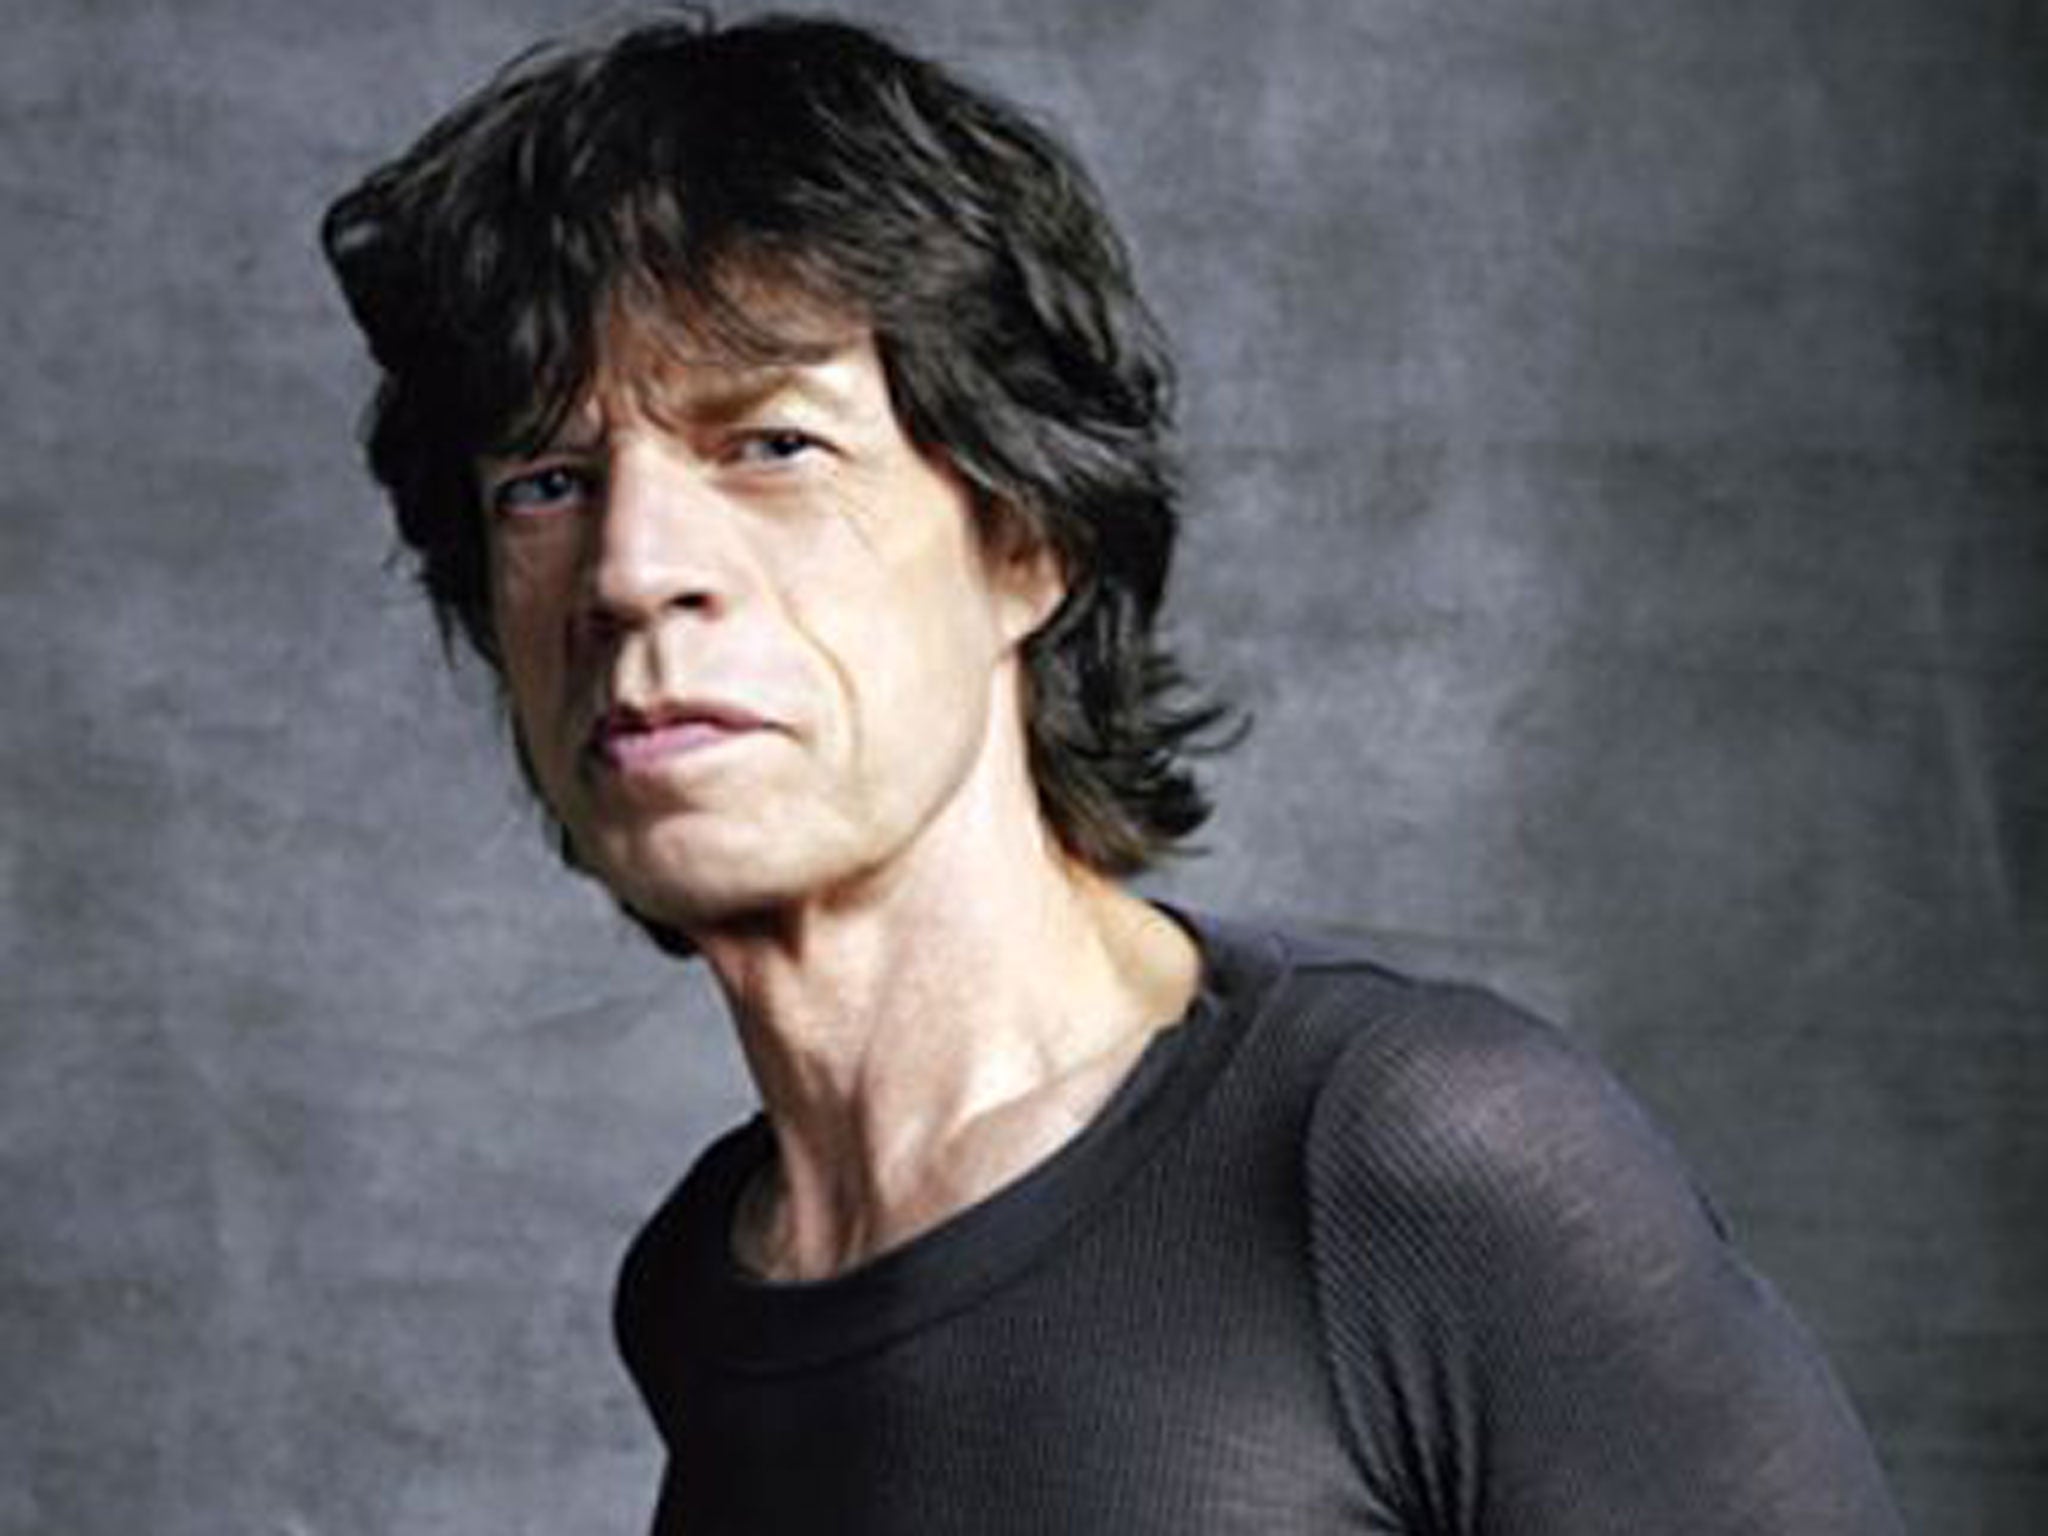 <p><strong>2. Air waves</strong></p>
<p>Mick Jagger kicks off a batch of musican-curated playlists &#x2013; organised in partnership with Songlines magazine &#x2013; for British Airways' in-flight entertainment this month. Sir Mick has chosen music by Malian afro-pop songwriter Salif Keita and the legendary Nigerian maestro Fela Kuti, among others. Other curators include Steve Martin. <a href="http://ba.com" target="_blank">ba.com</a></p>